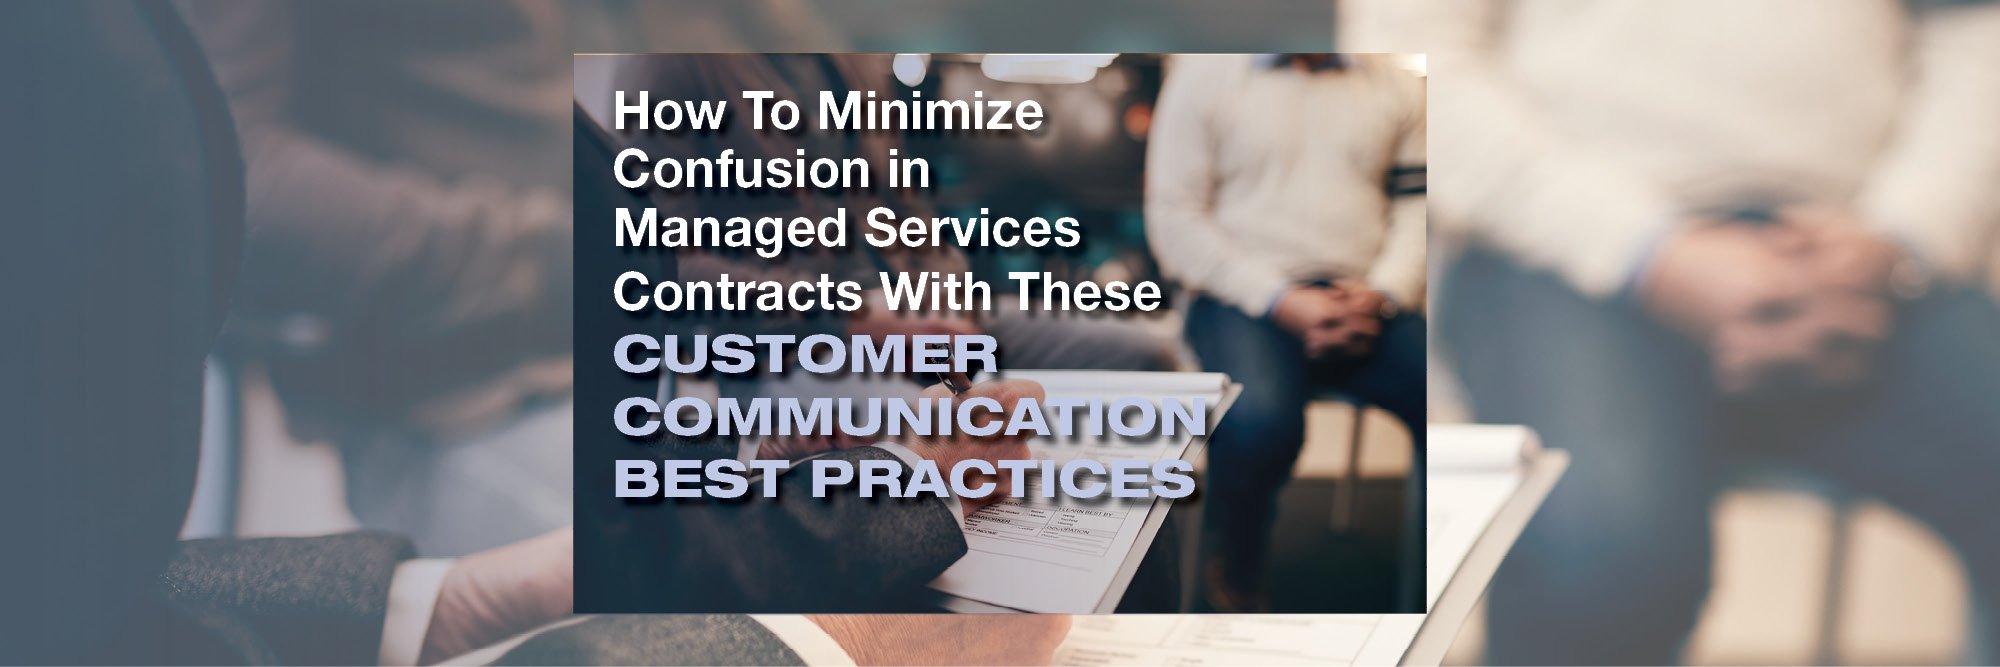 How To Minimize Confusion in Managed Services Contracts With These Customer Communication Best Practices